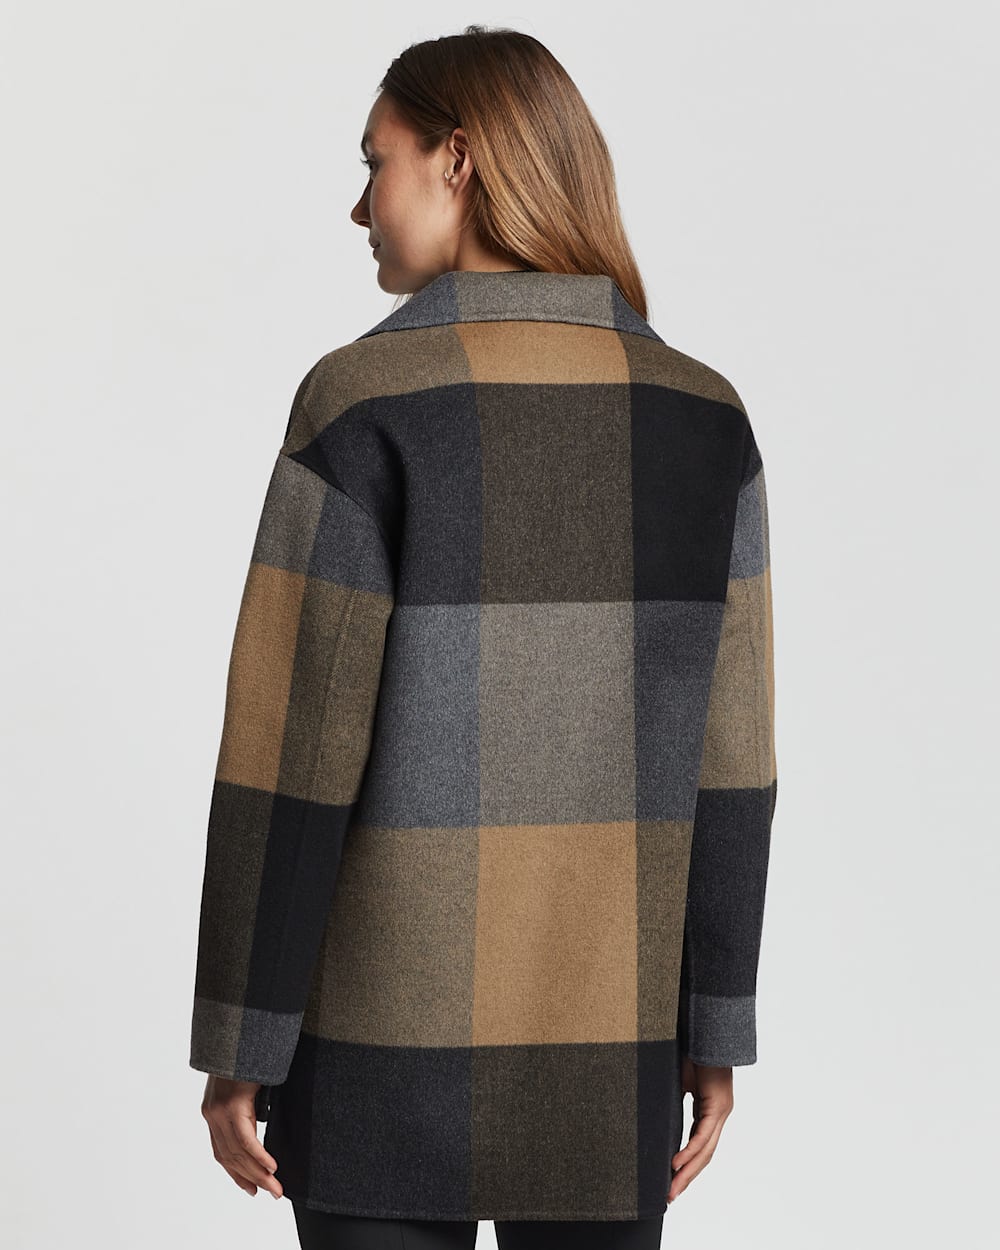 ALTERNATE VIEW OF WOMEN'S FLAGSTAFF WOOL TOPPER COAT IN CHARCOAL/CAMEL PLAID image number 3